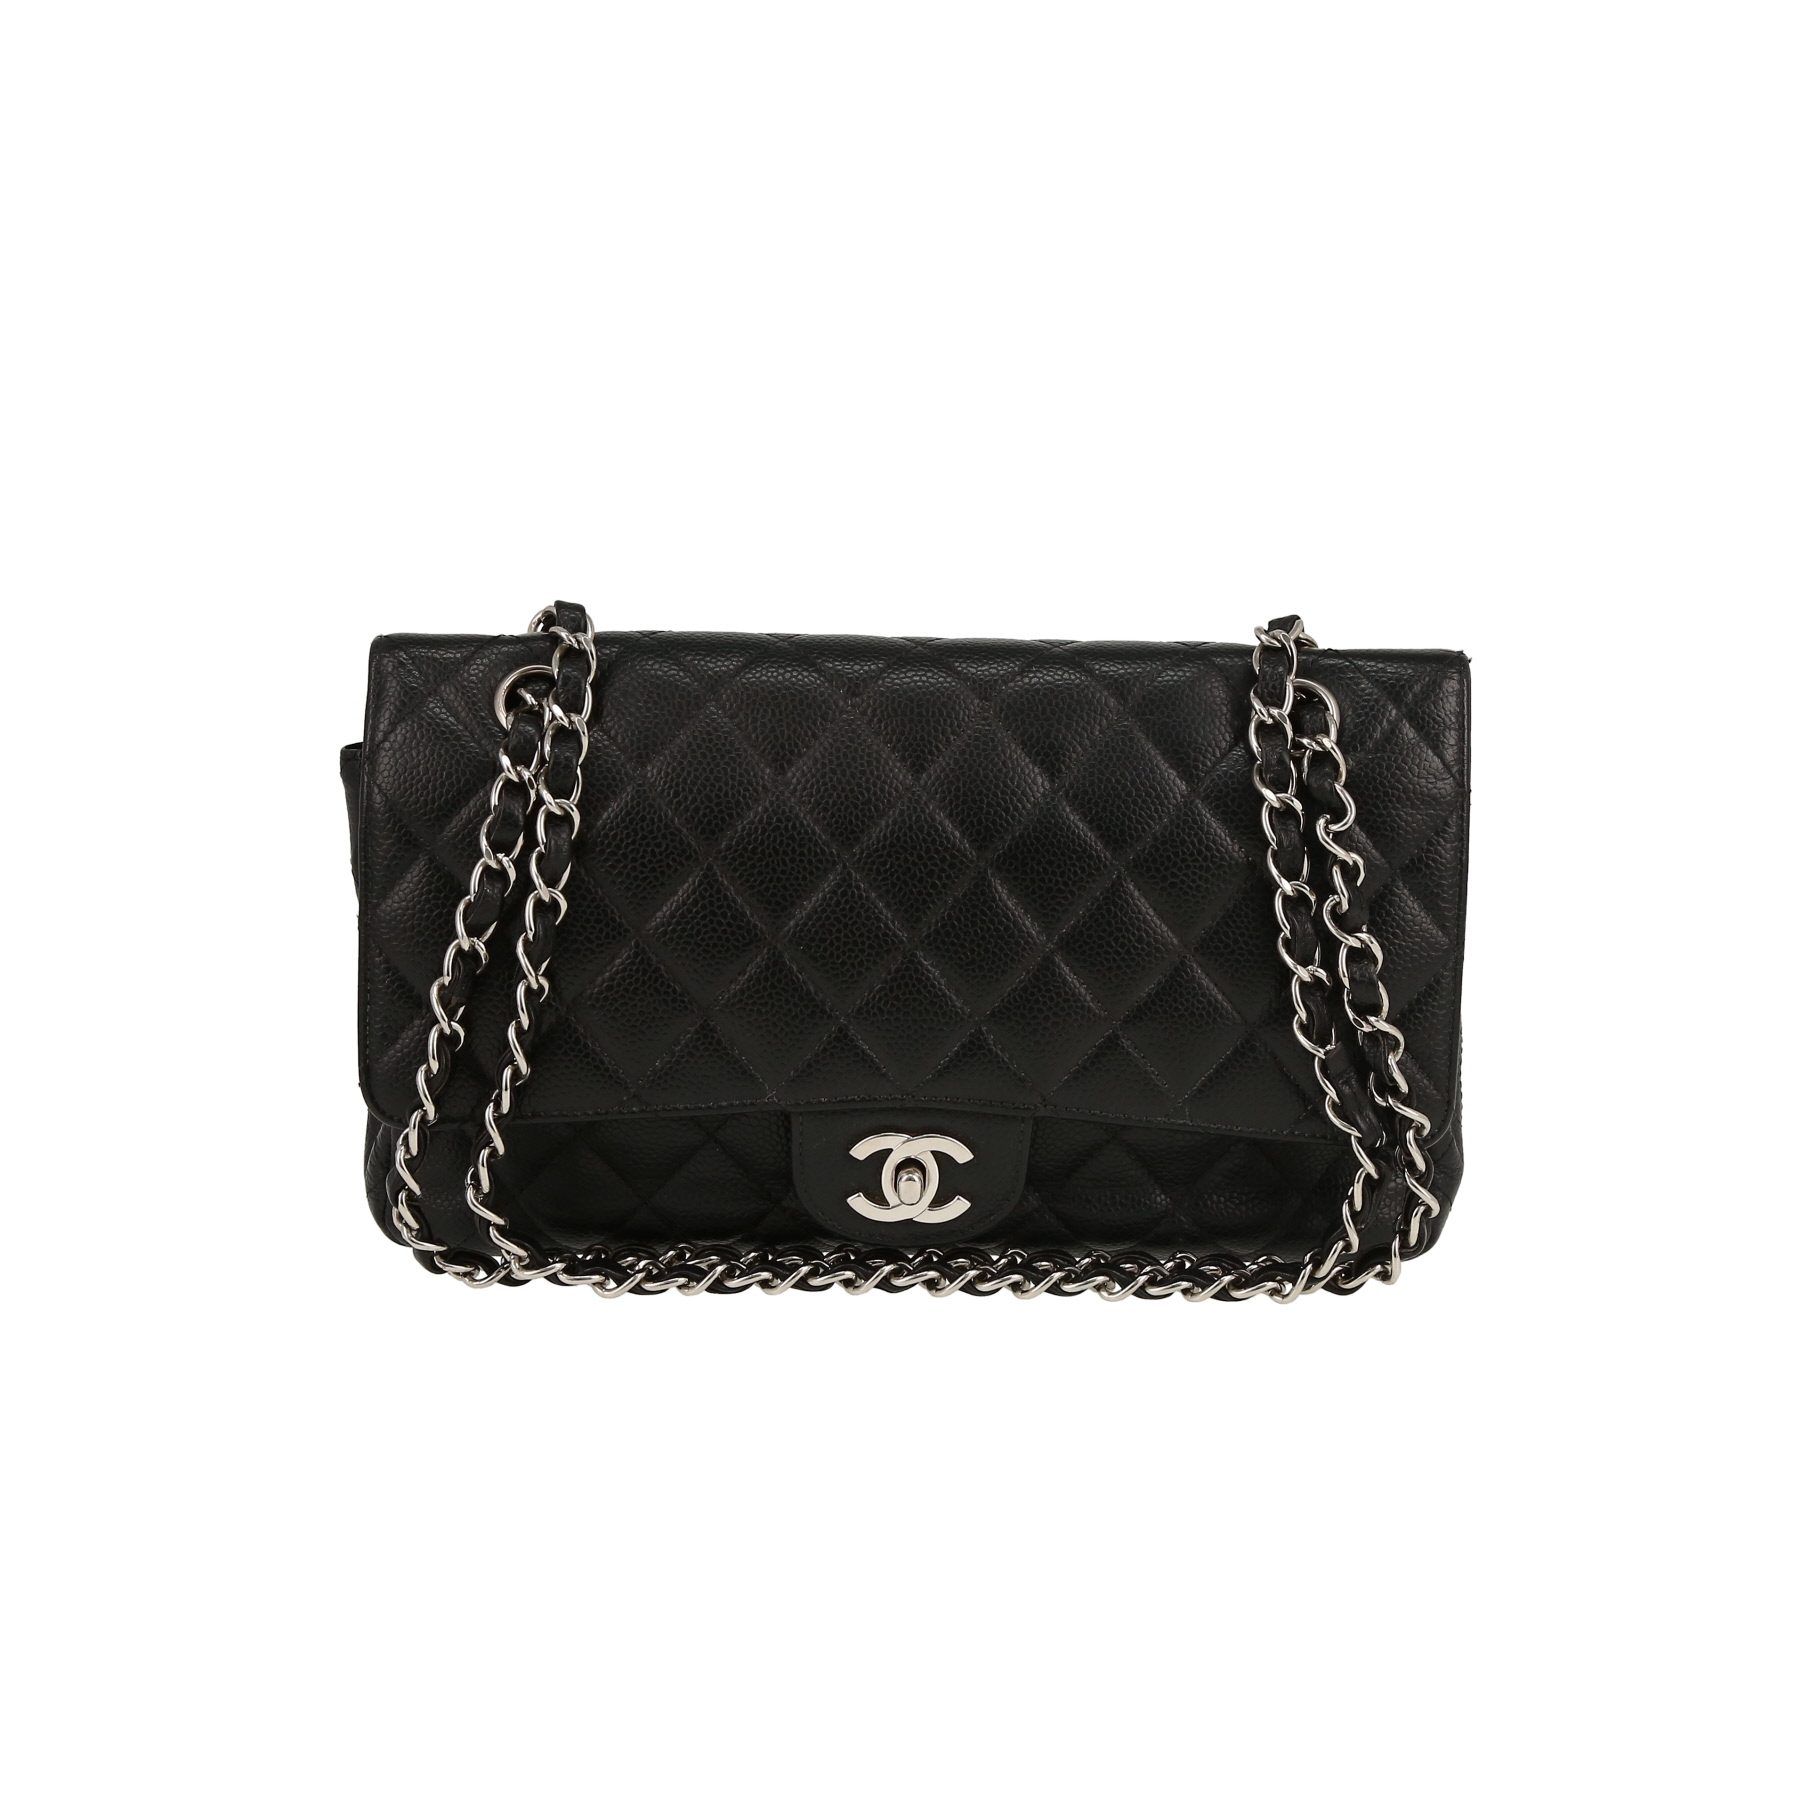 Timeless Classic Handbag In Black Quilted Leather